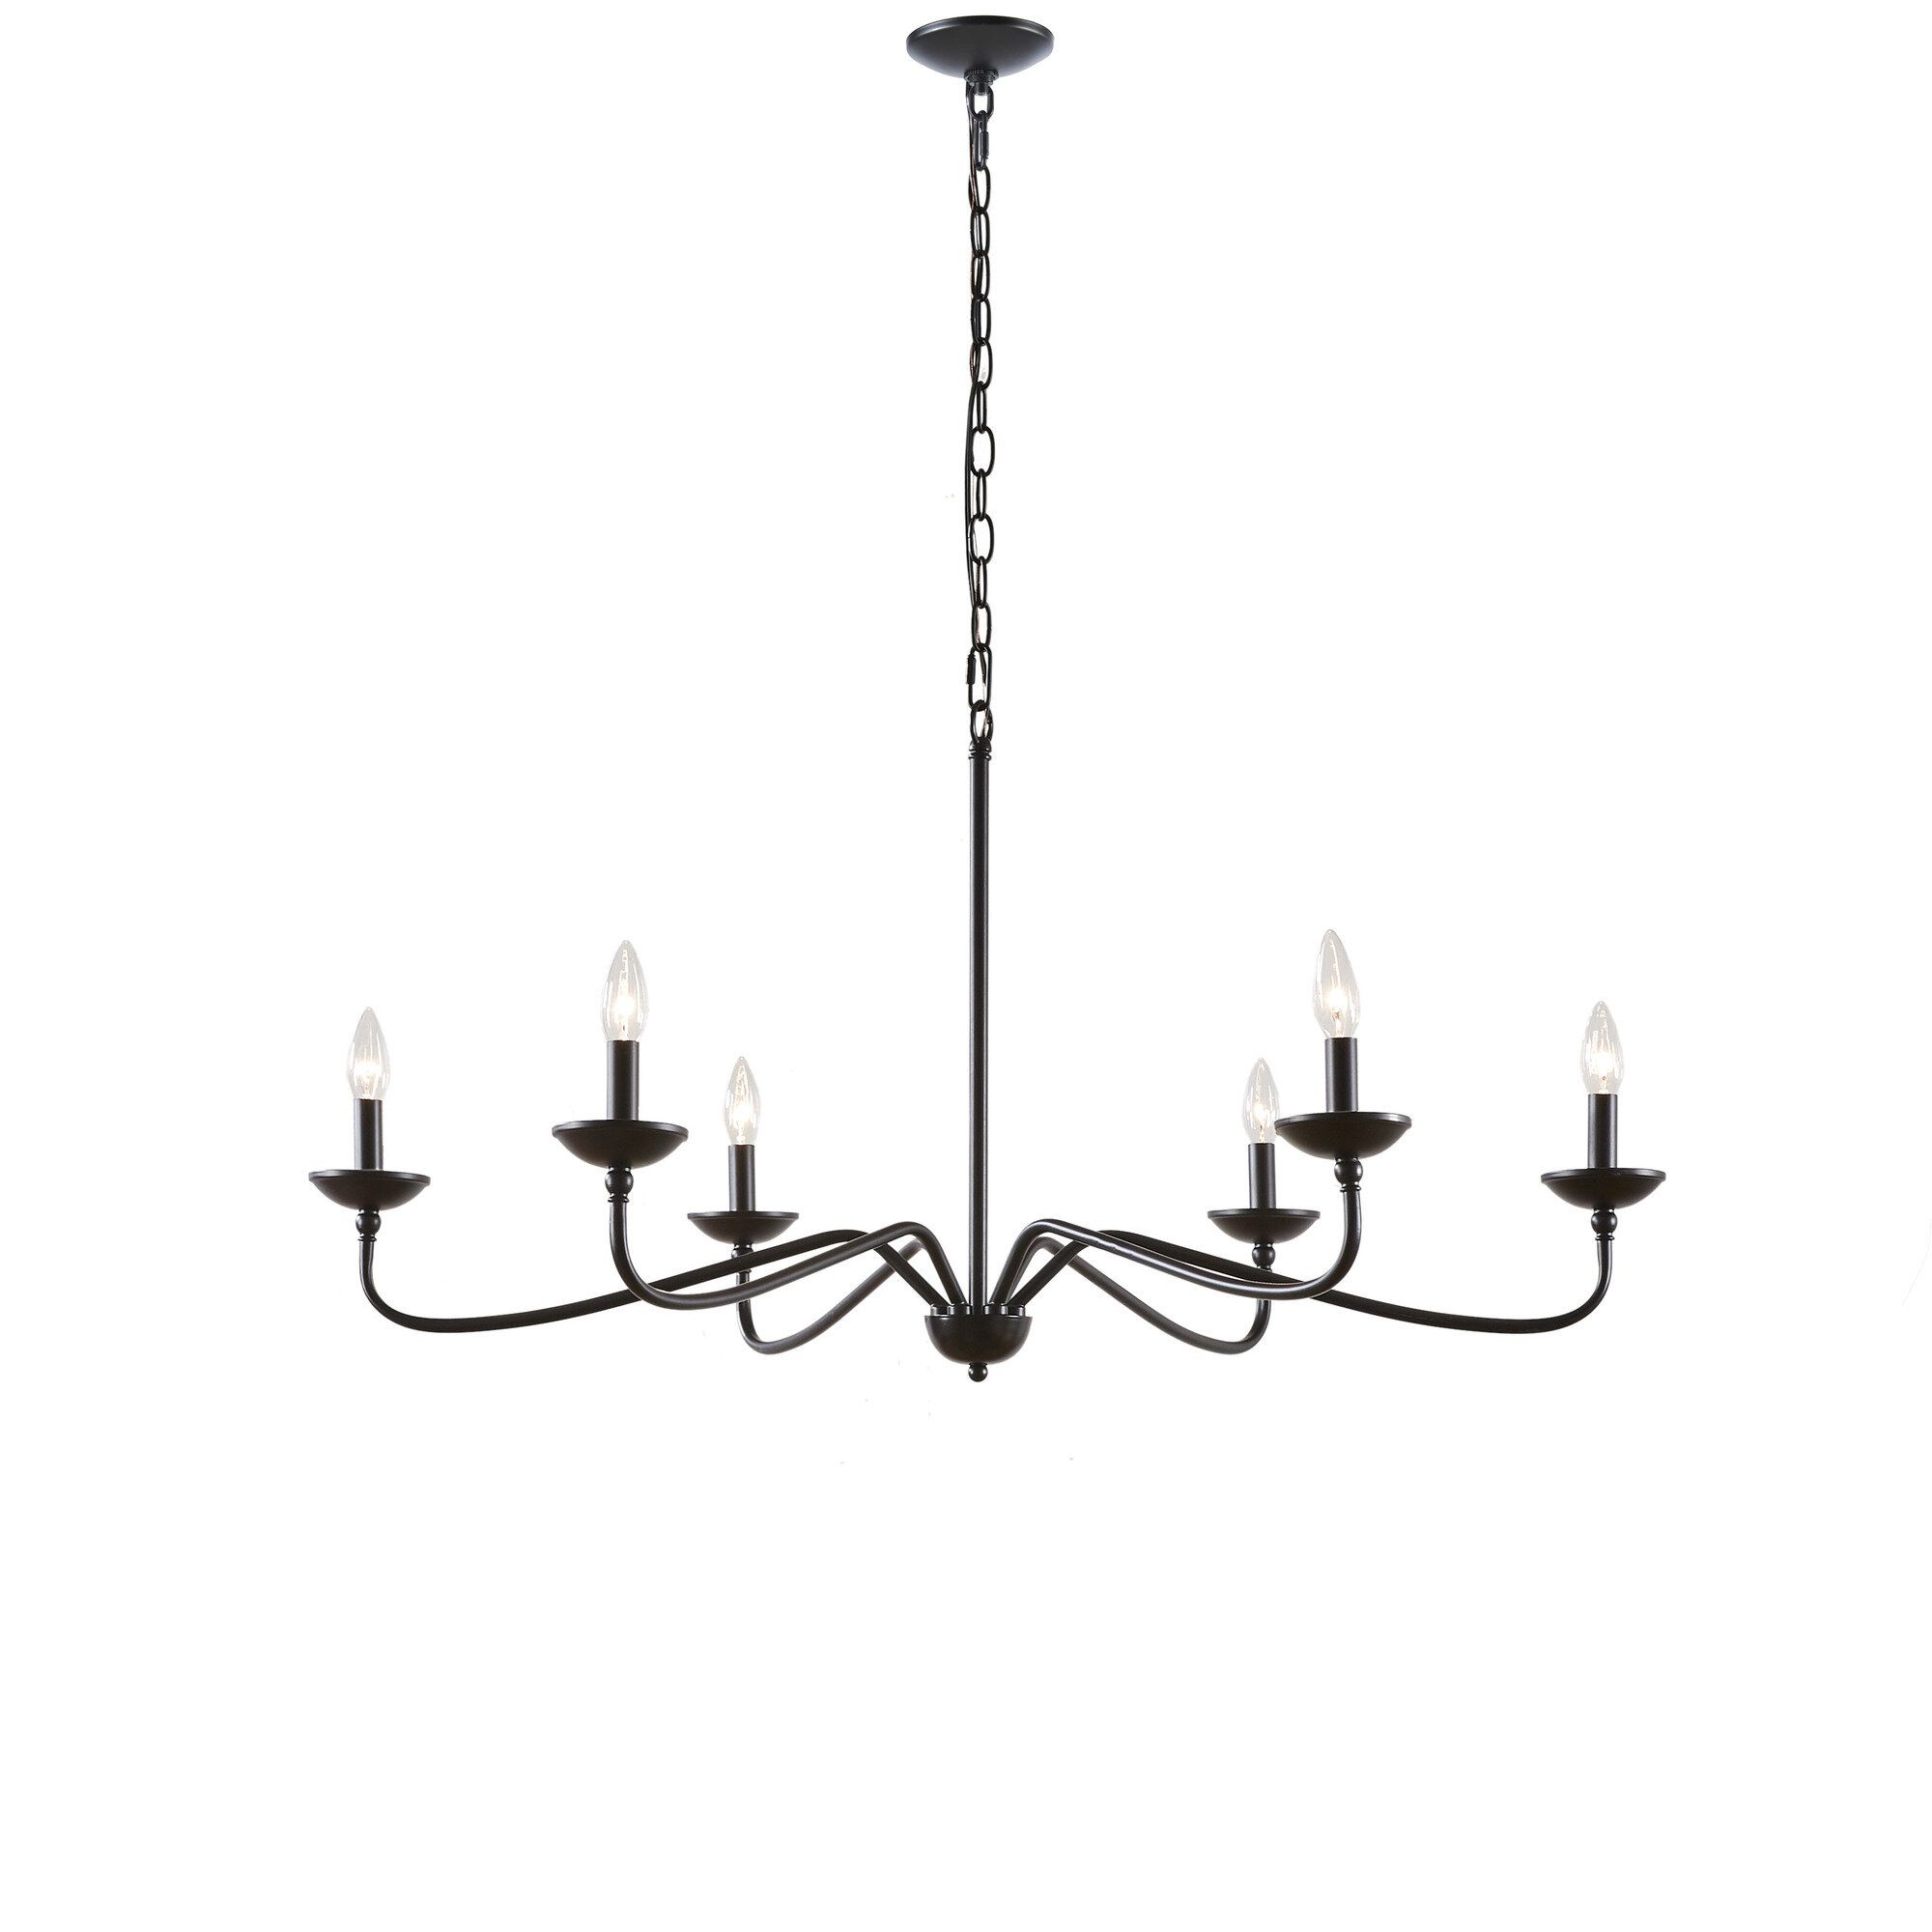 Scannell 6 Light Candle Style Chandelier With Diaz 6 Light Candle Style Chandeliers (View 7 of 30)